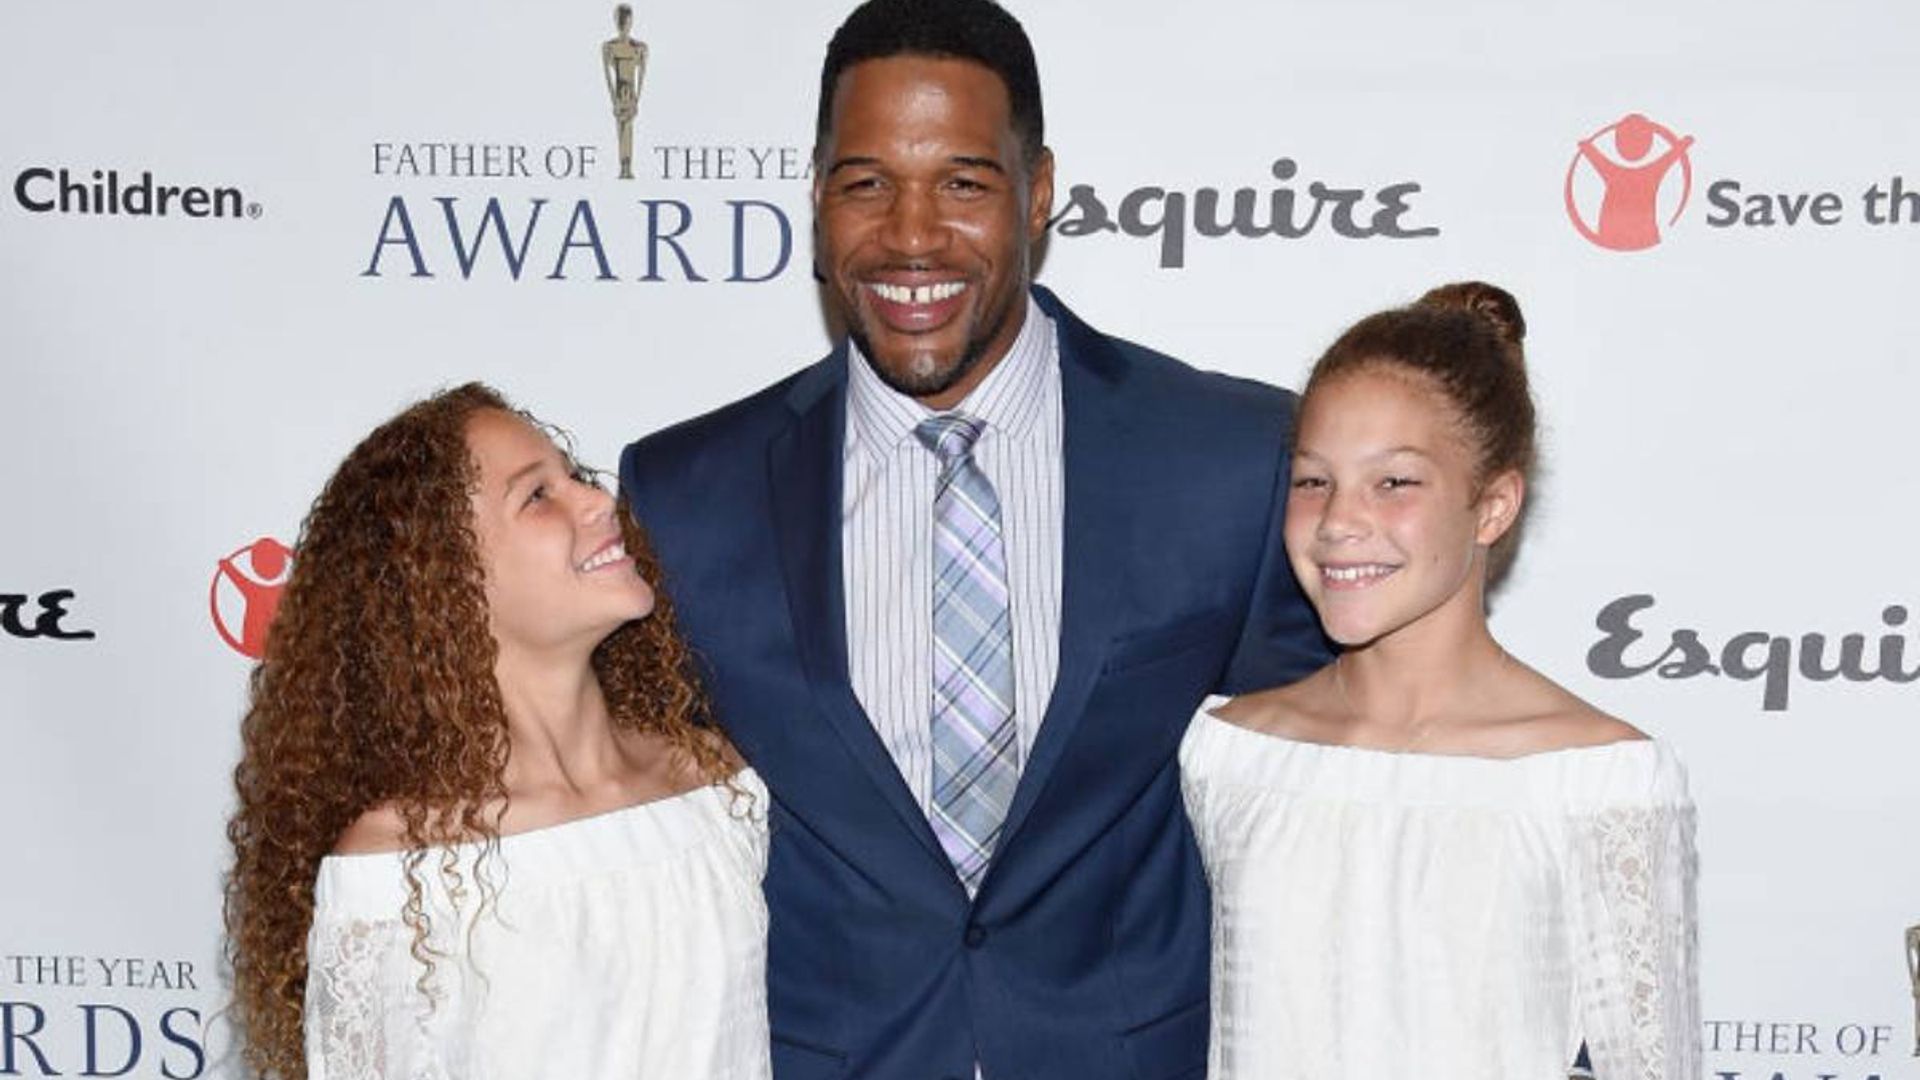 Michael Strahan's daughter is the perfect prom queen in beautiful new photos